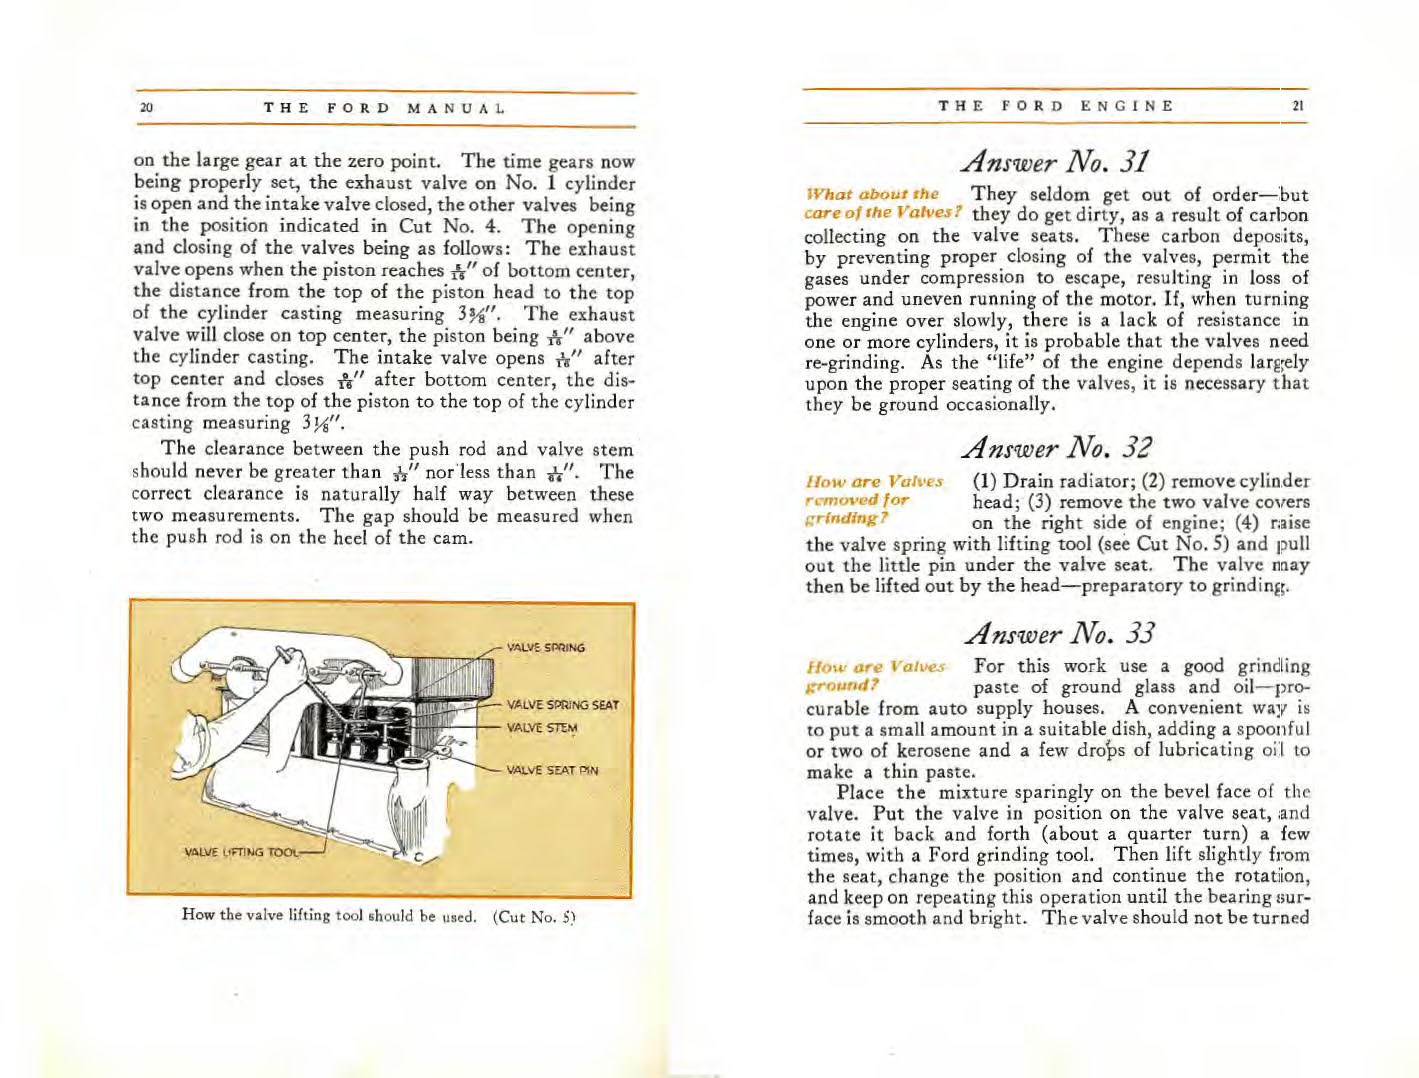 1915_Ford_Owners_Manual-20-21